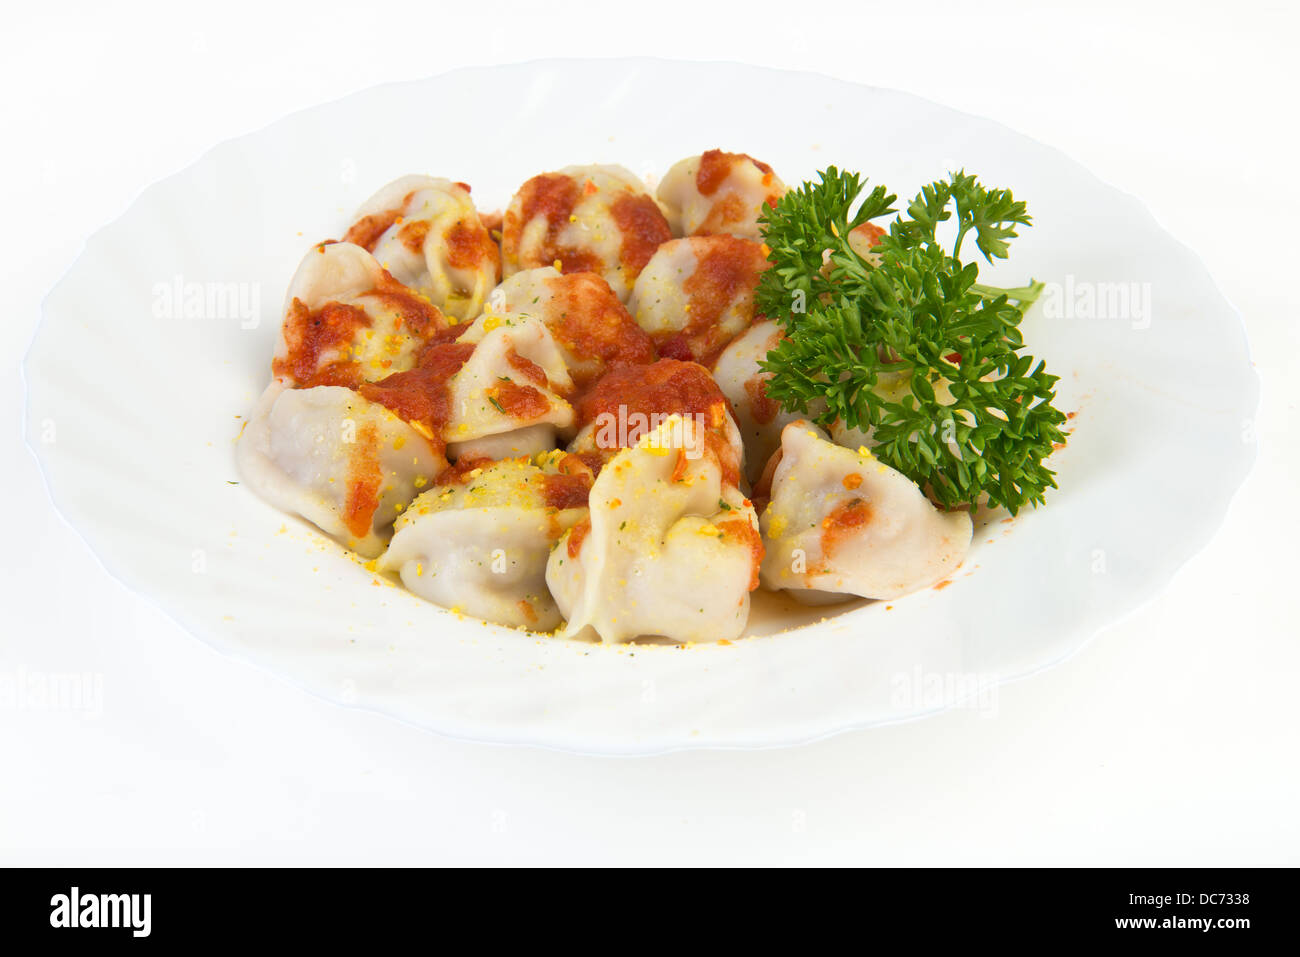 Boiled ravioli with red sauce Stock Photo